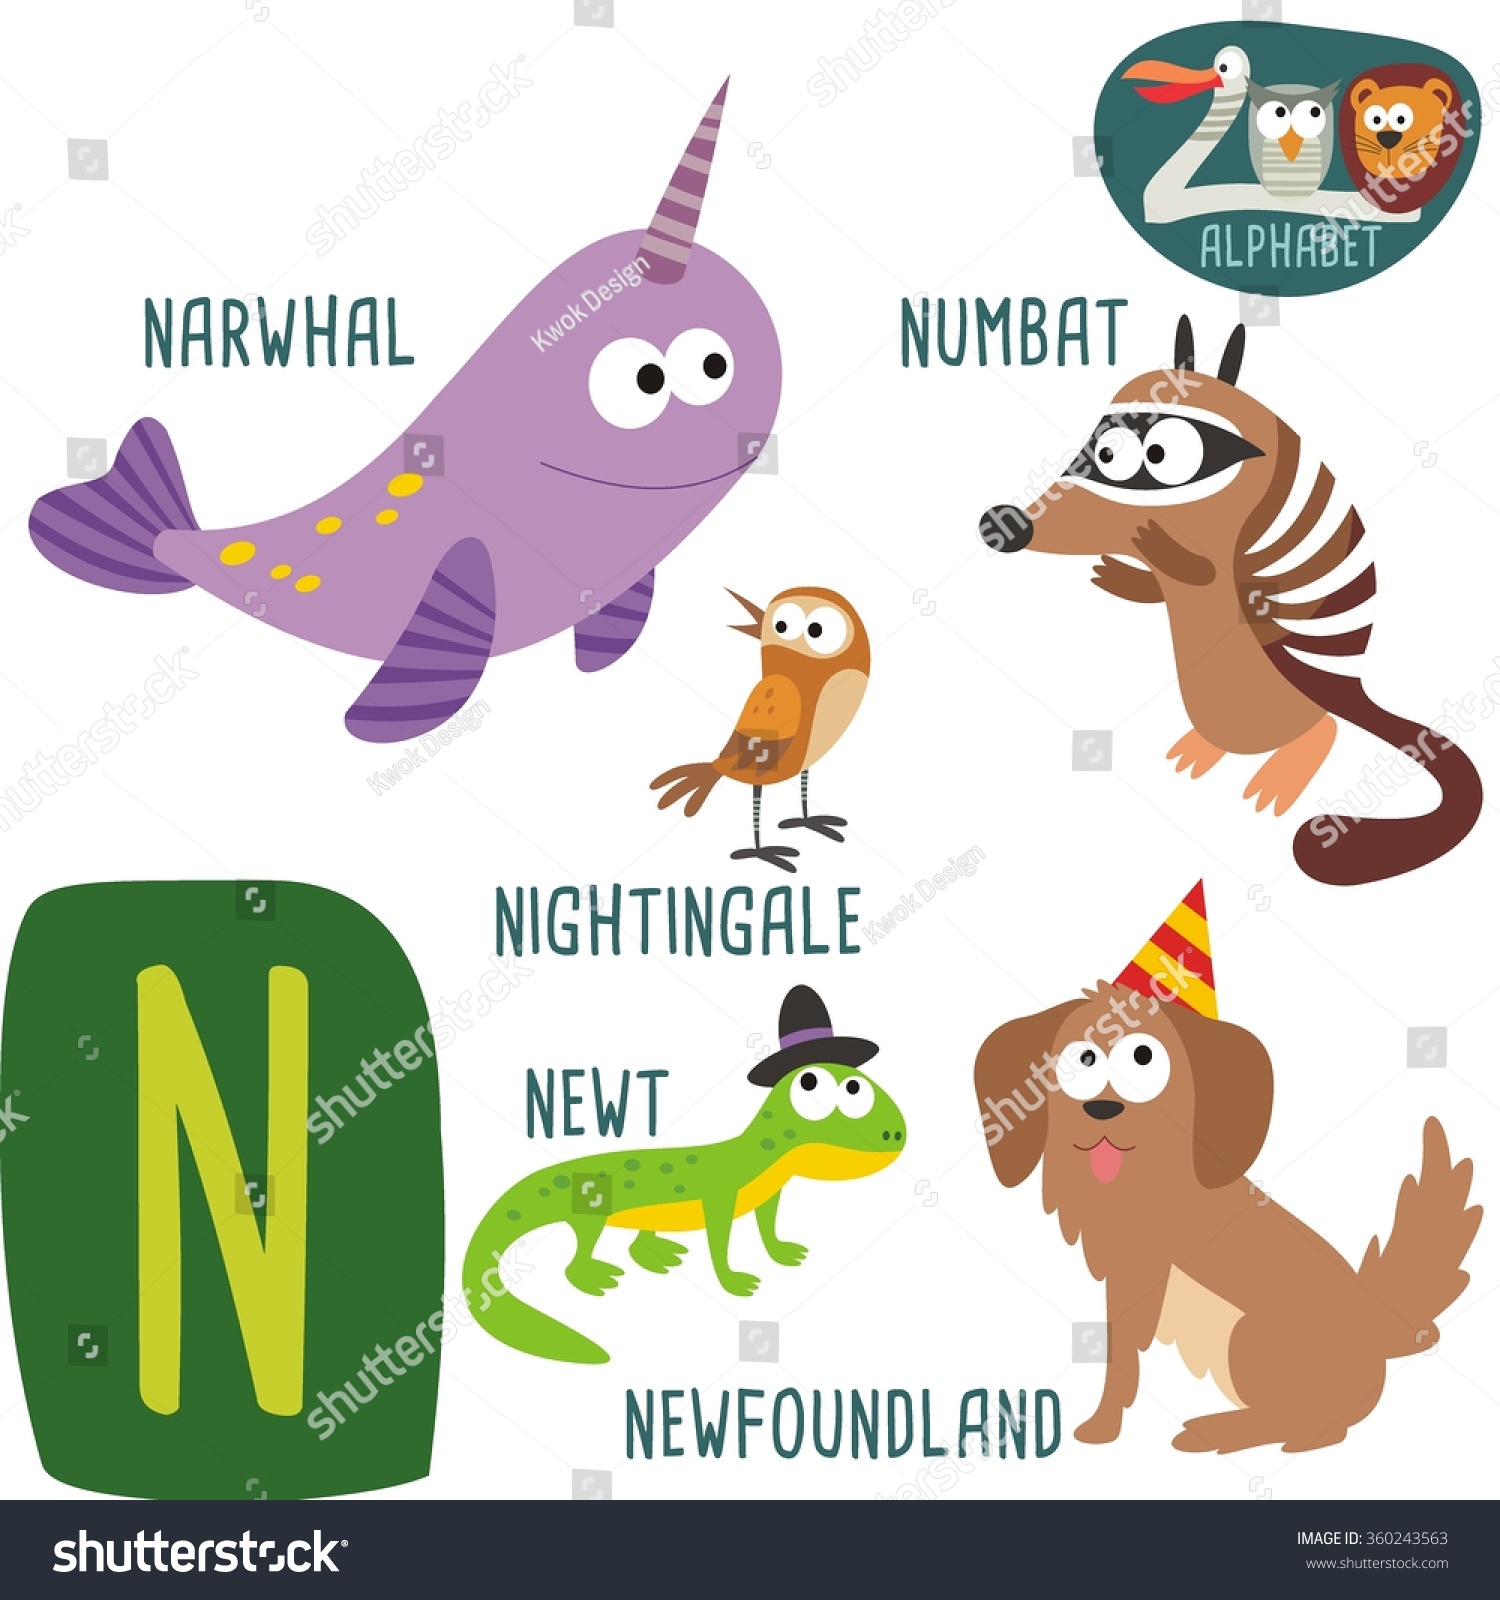 Animals That Start With N - All The Animals In The World